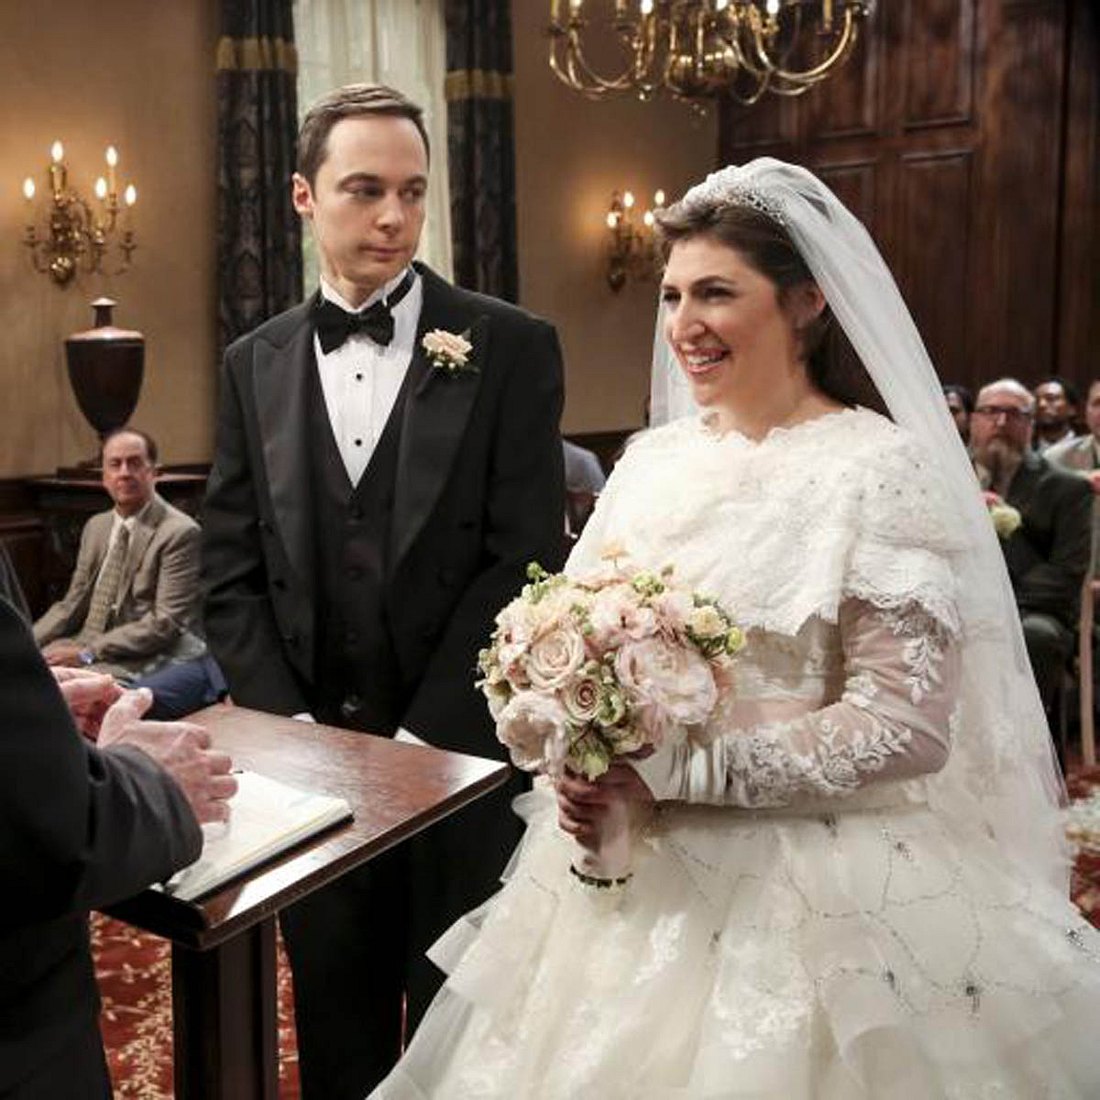 „The Big Bang Theory“: Hätte Amy fast “Nein” gesagt?